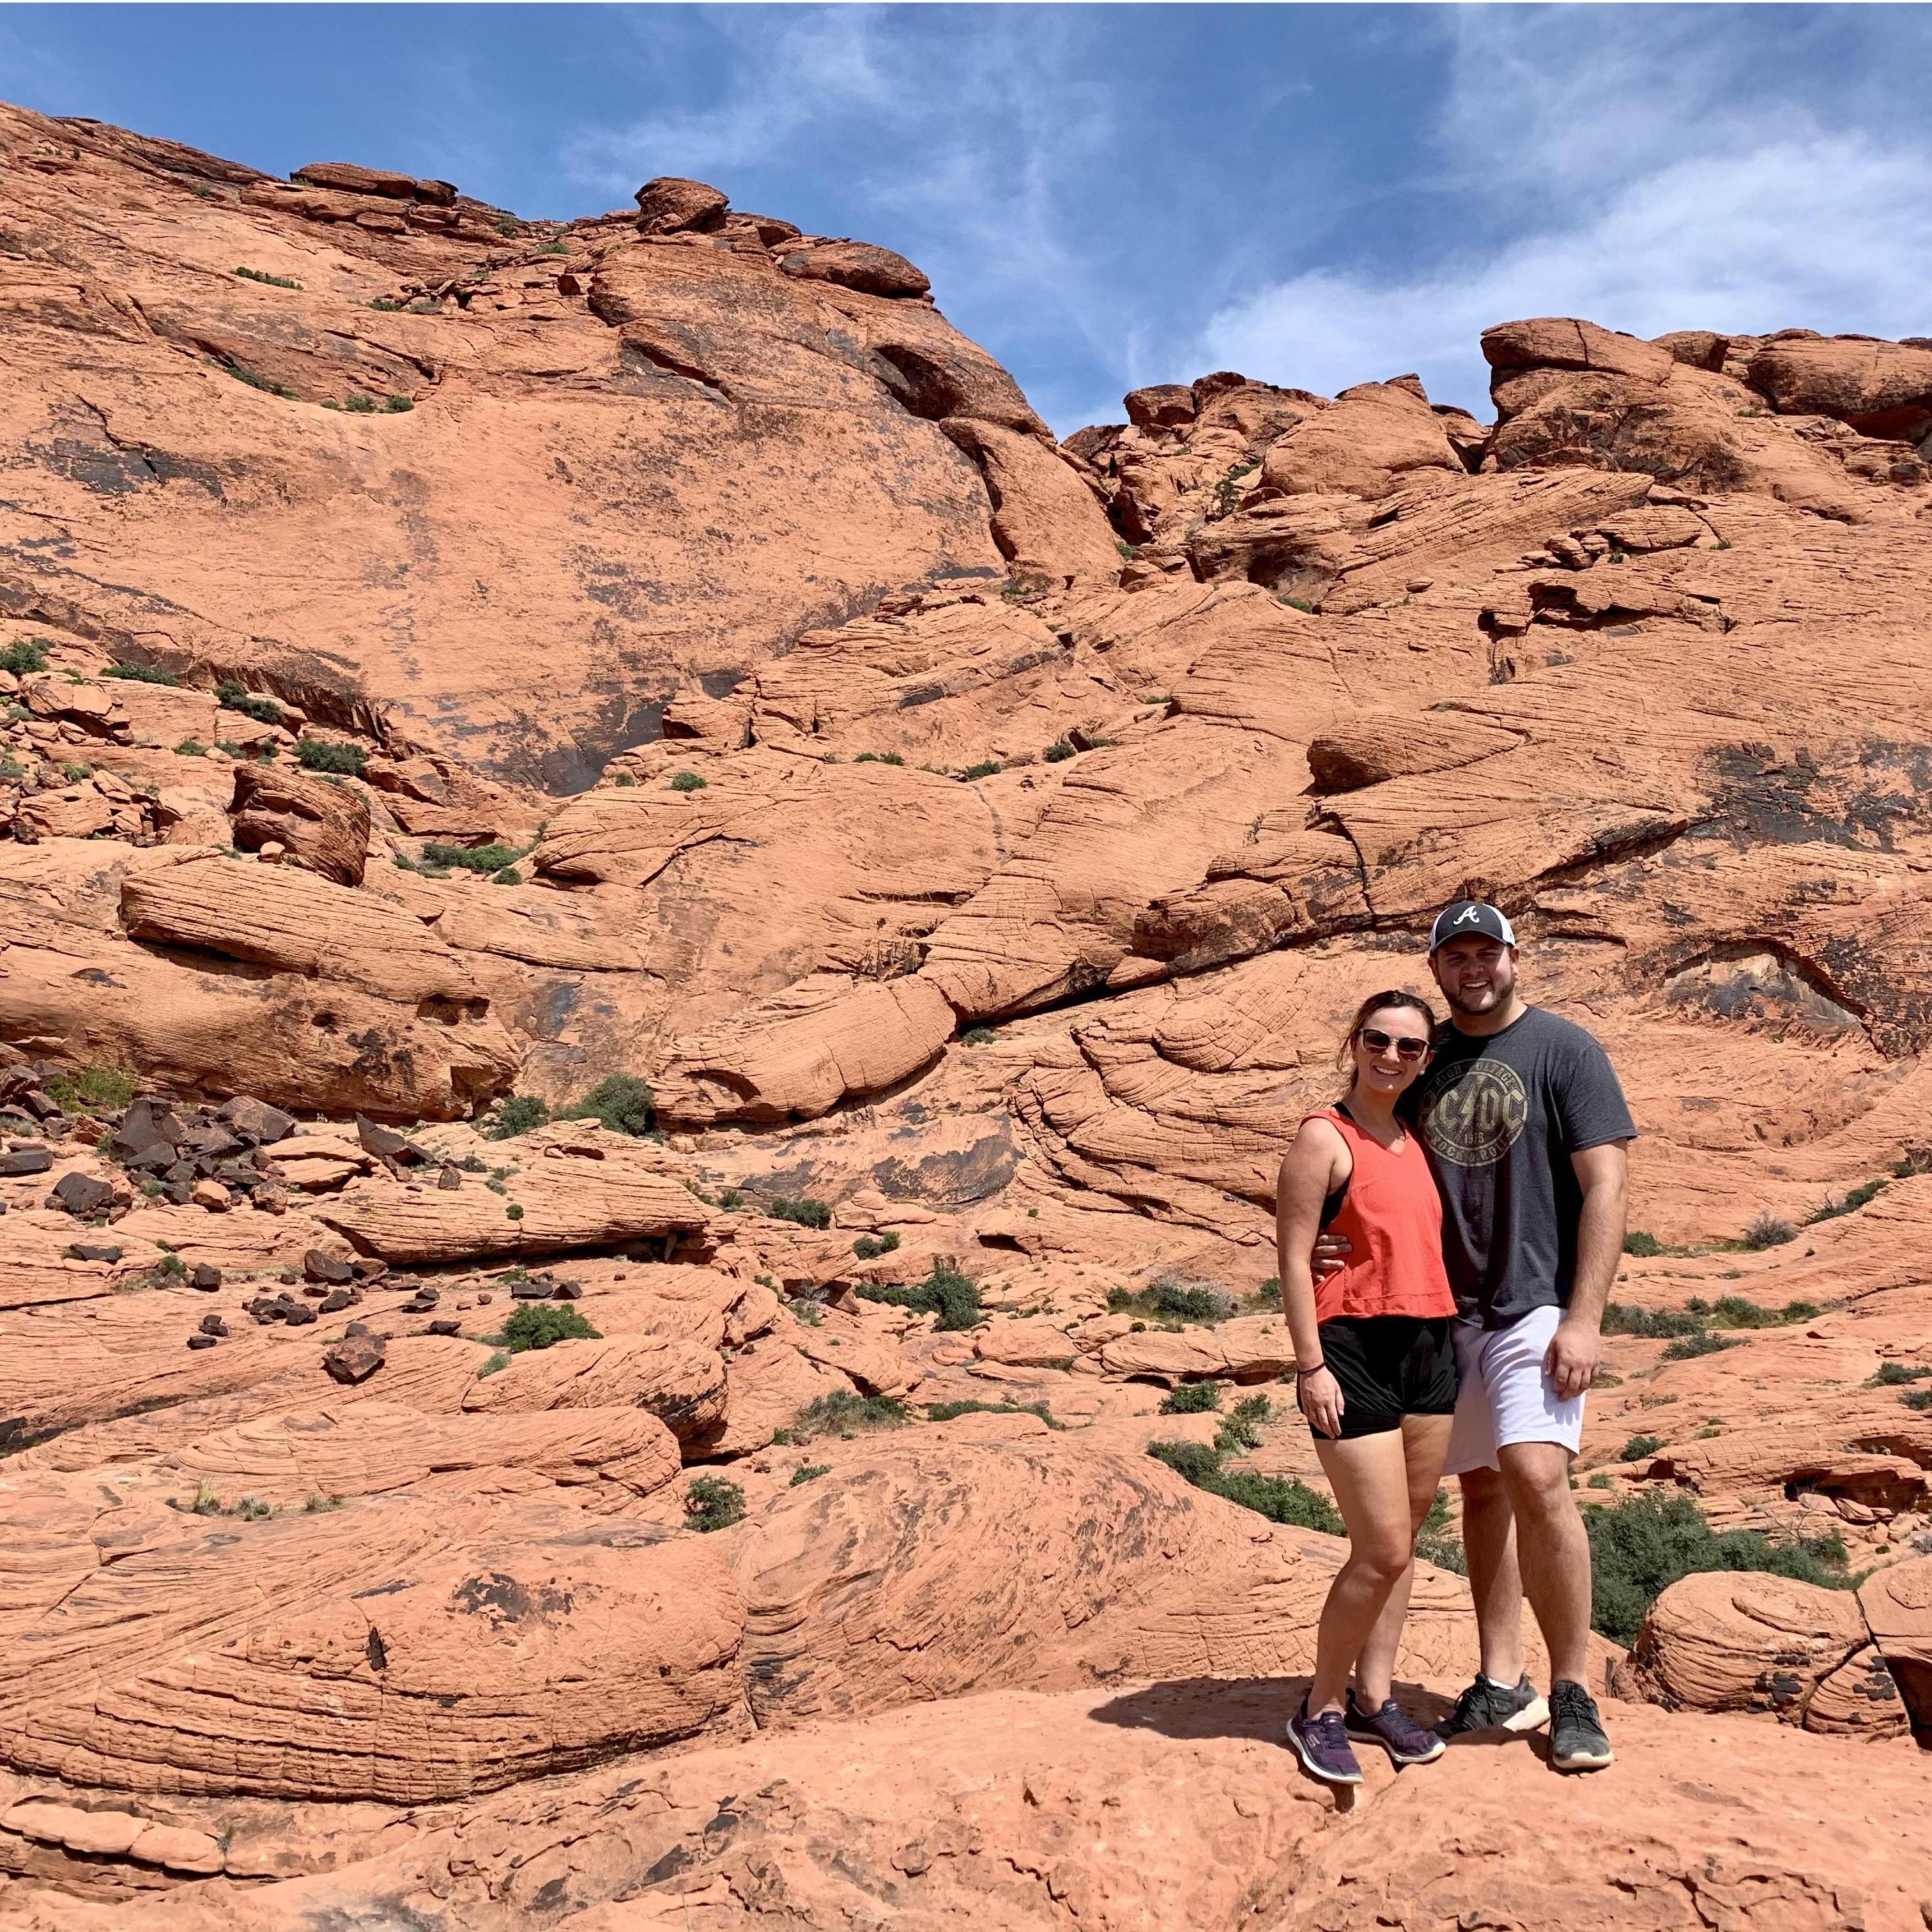 Shortly after Colt & I officially became a couple, we headed to Las Vegas with his Mom & David to celebrate their anniversary. One day, we went hiking in the Red Rock National Conservation Area.